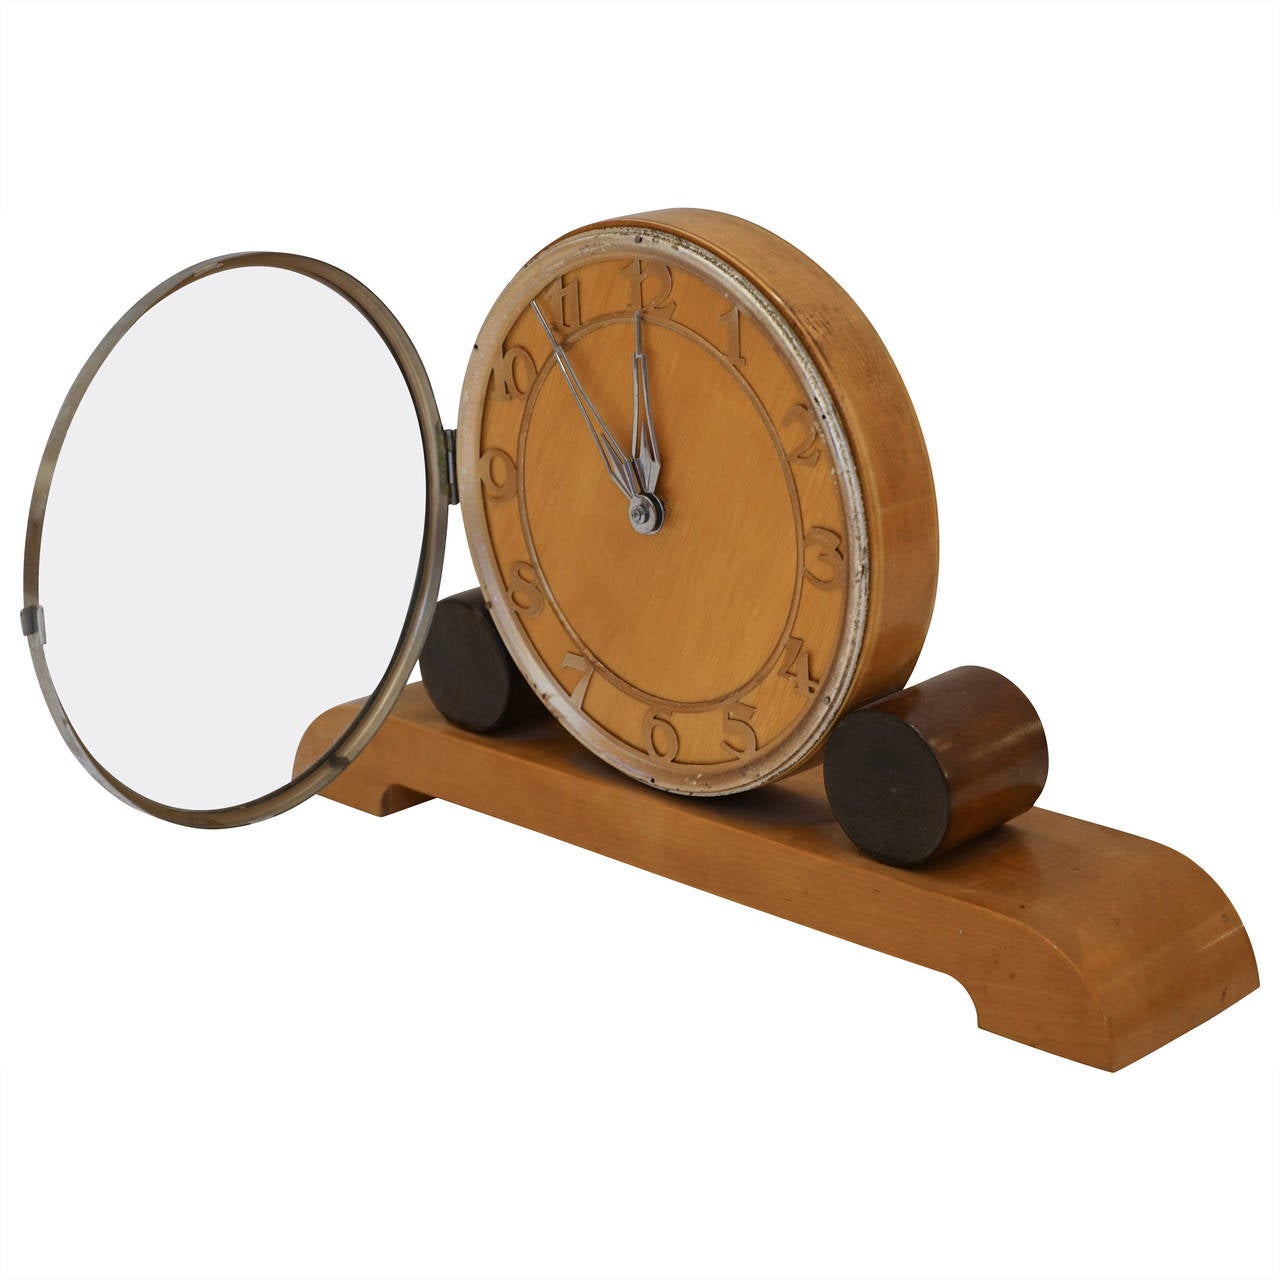 The geometric design and the stylized numbering with concentric chrome banding give this two toned wooden clock pizazz!  The clock runs using the original movement which winds in the back, but needs adjustment by our clock restorer before shipping,